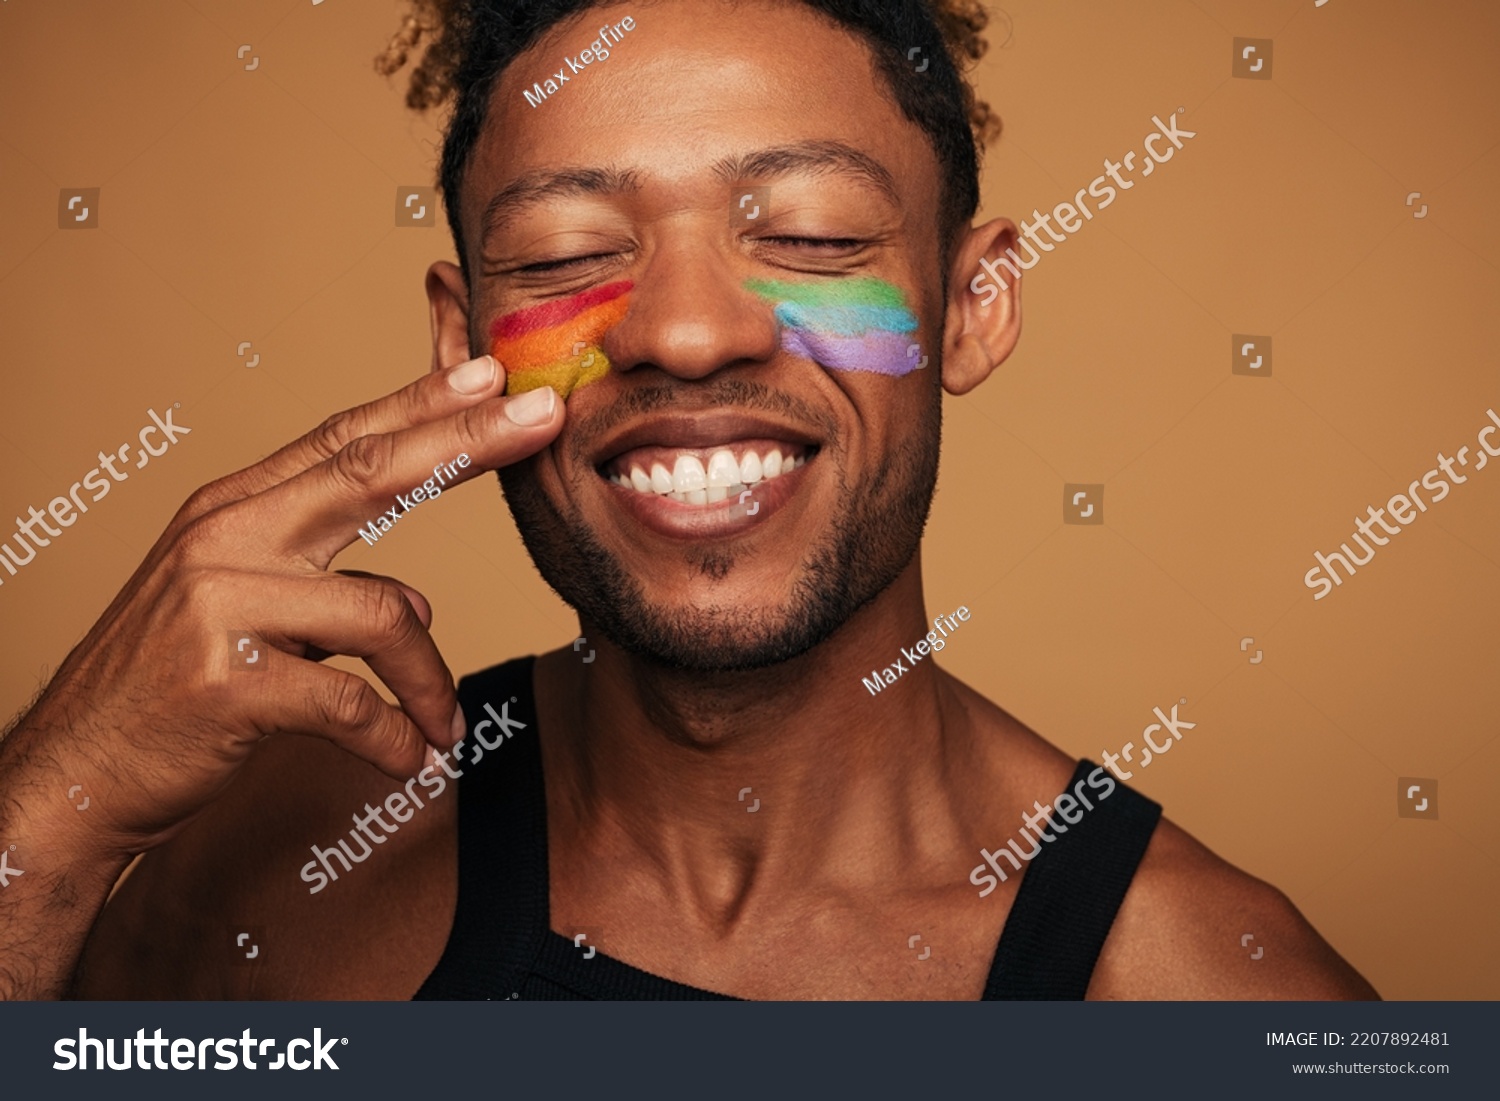 Cheerful African American gay smiling with closed eyes and painting rainbow on cheeks during LGBT pride event against brown background #2207892481